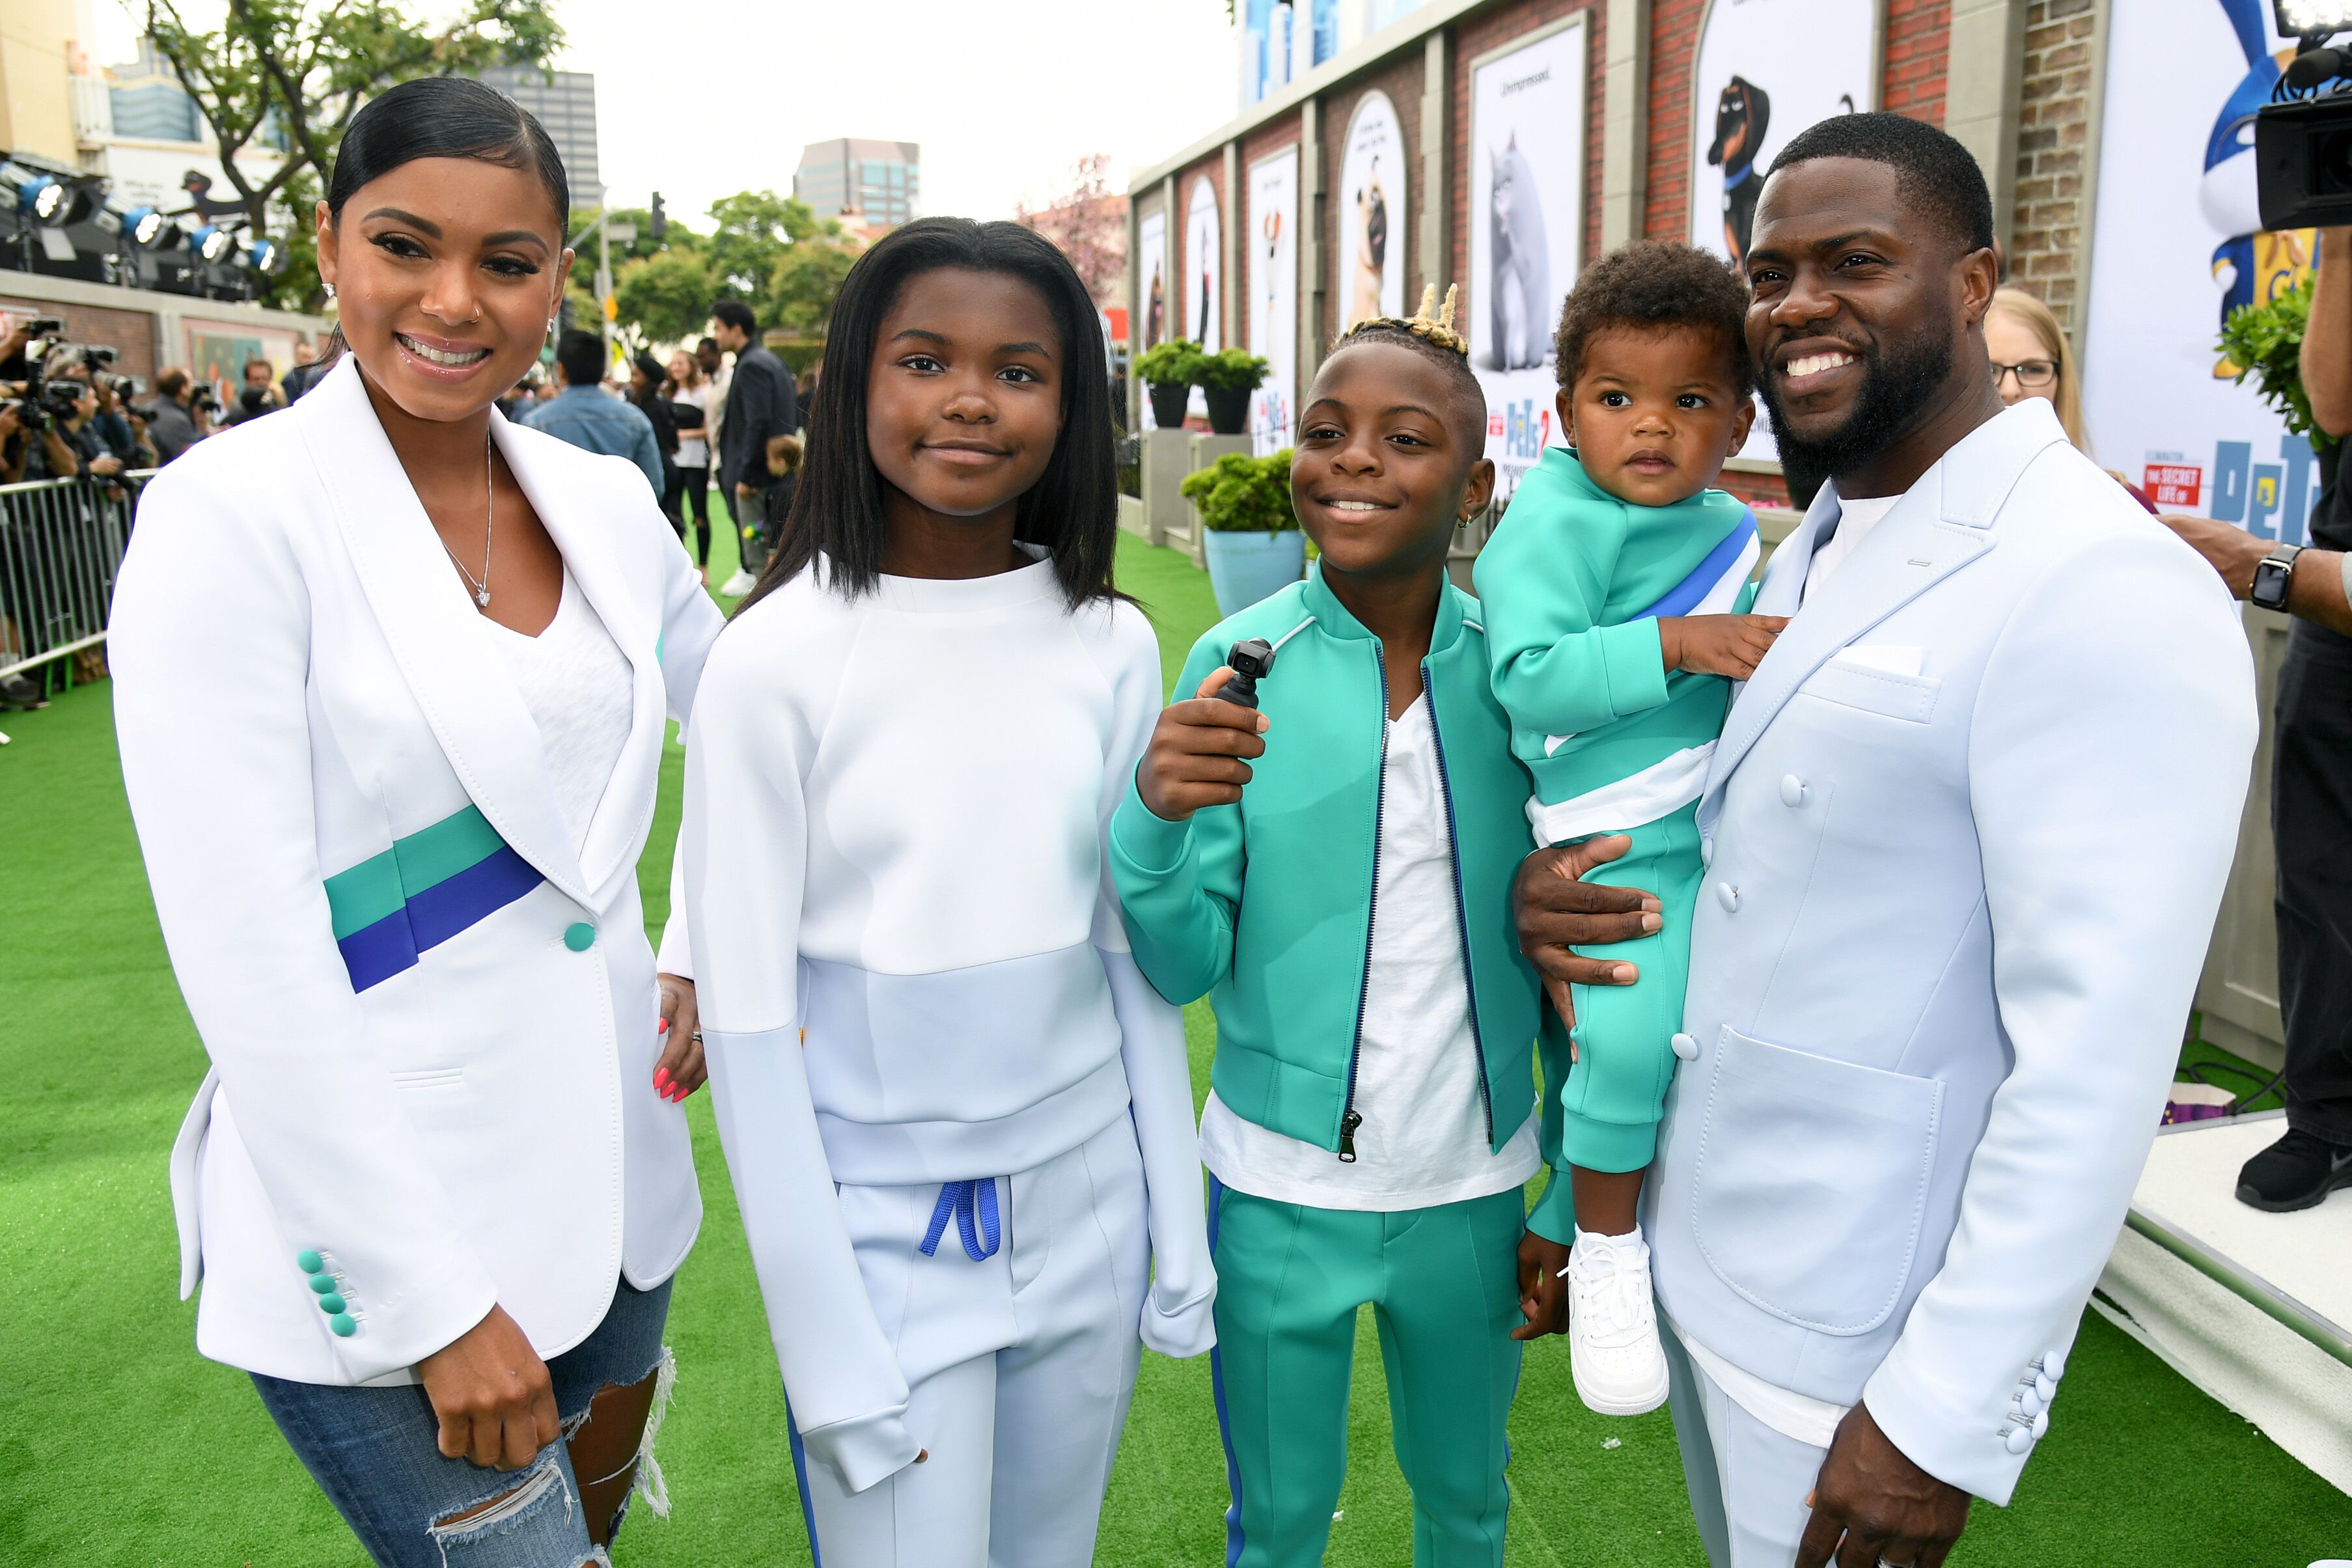 Kevin Hart and family in coordinated outfits during a public event. | Source: Getty Images/GlobalImagesUkraine